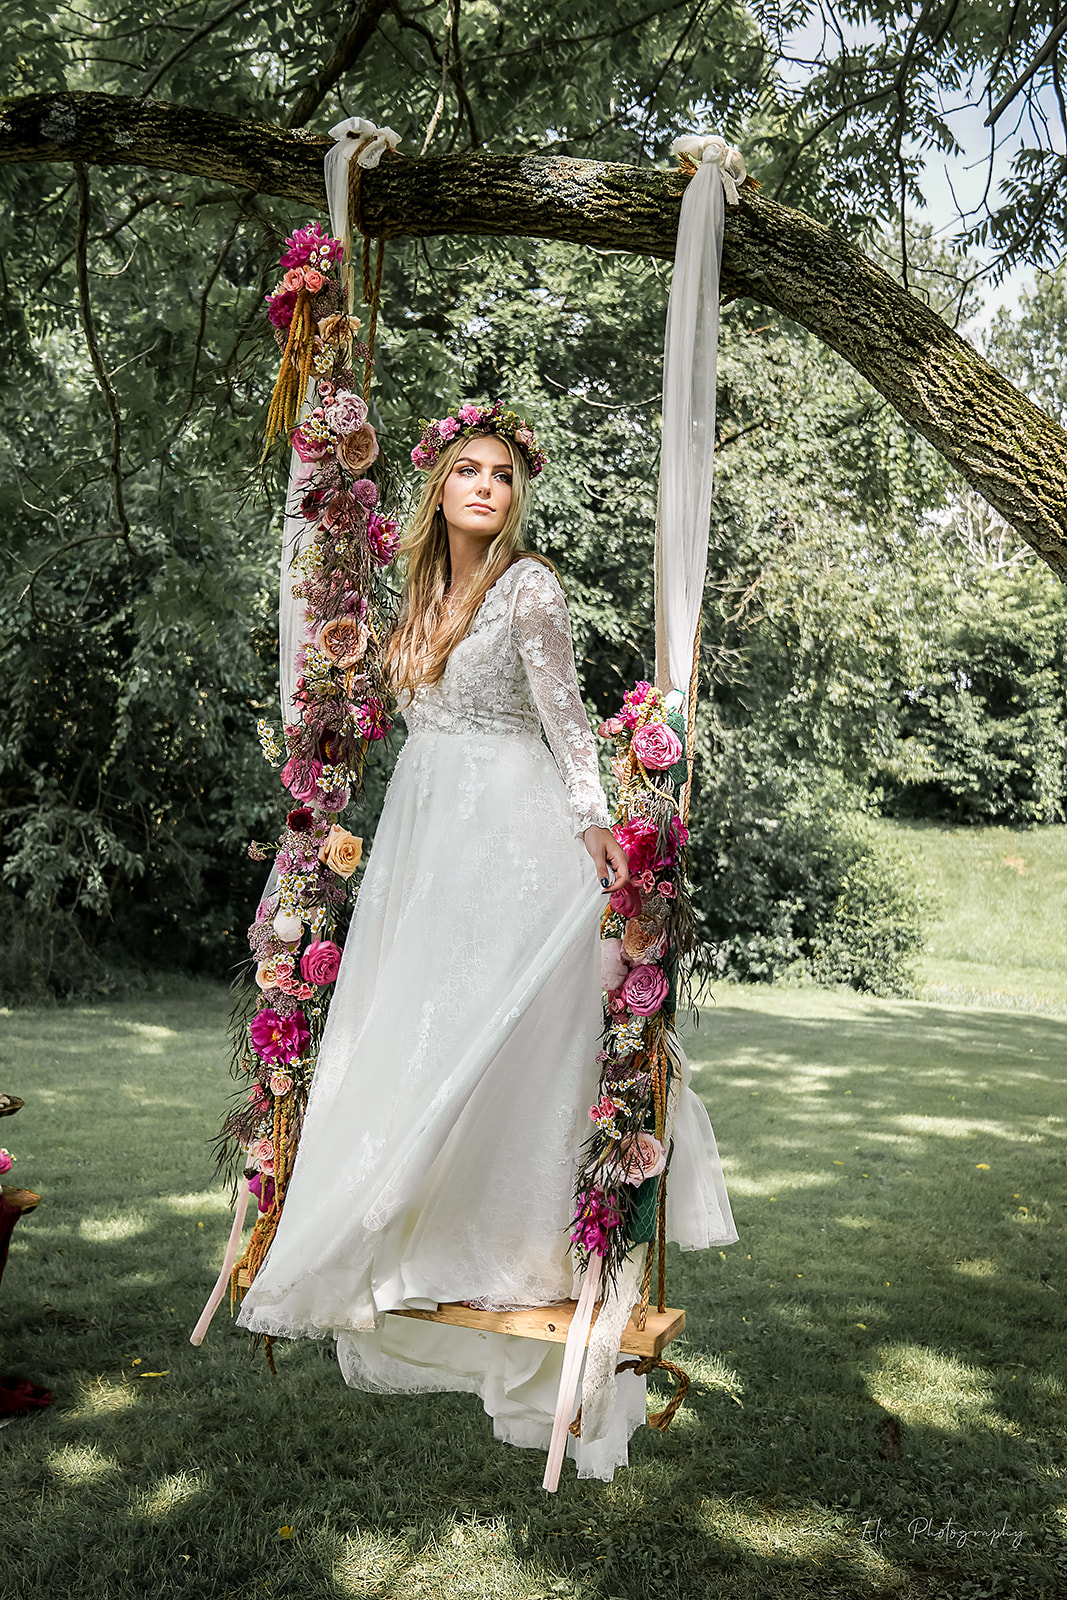 bohemian bride on swing wearing dress by Lace Bridal Couture flowers by Kindly Grown at Cedar Bay Farm